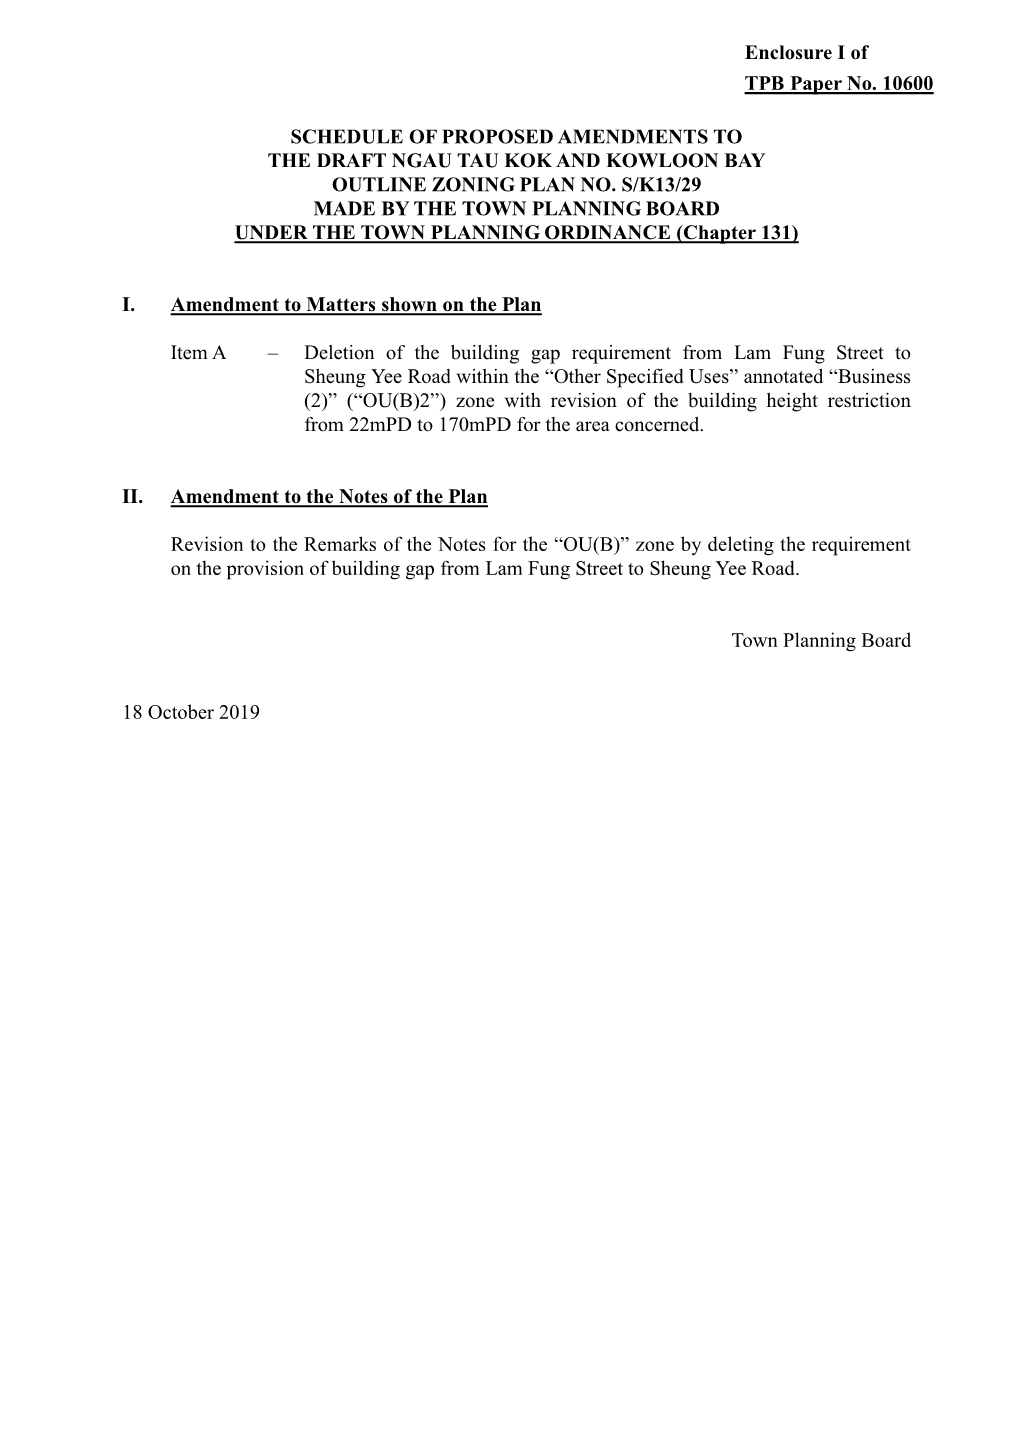 Schedule of Proposed Amendments to the Draft Ngau Tau Kok and Kowloon Bay Outline Zoning Plan No